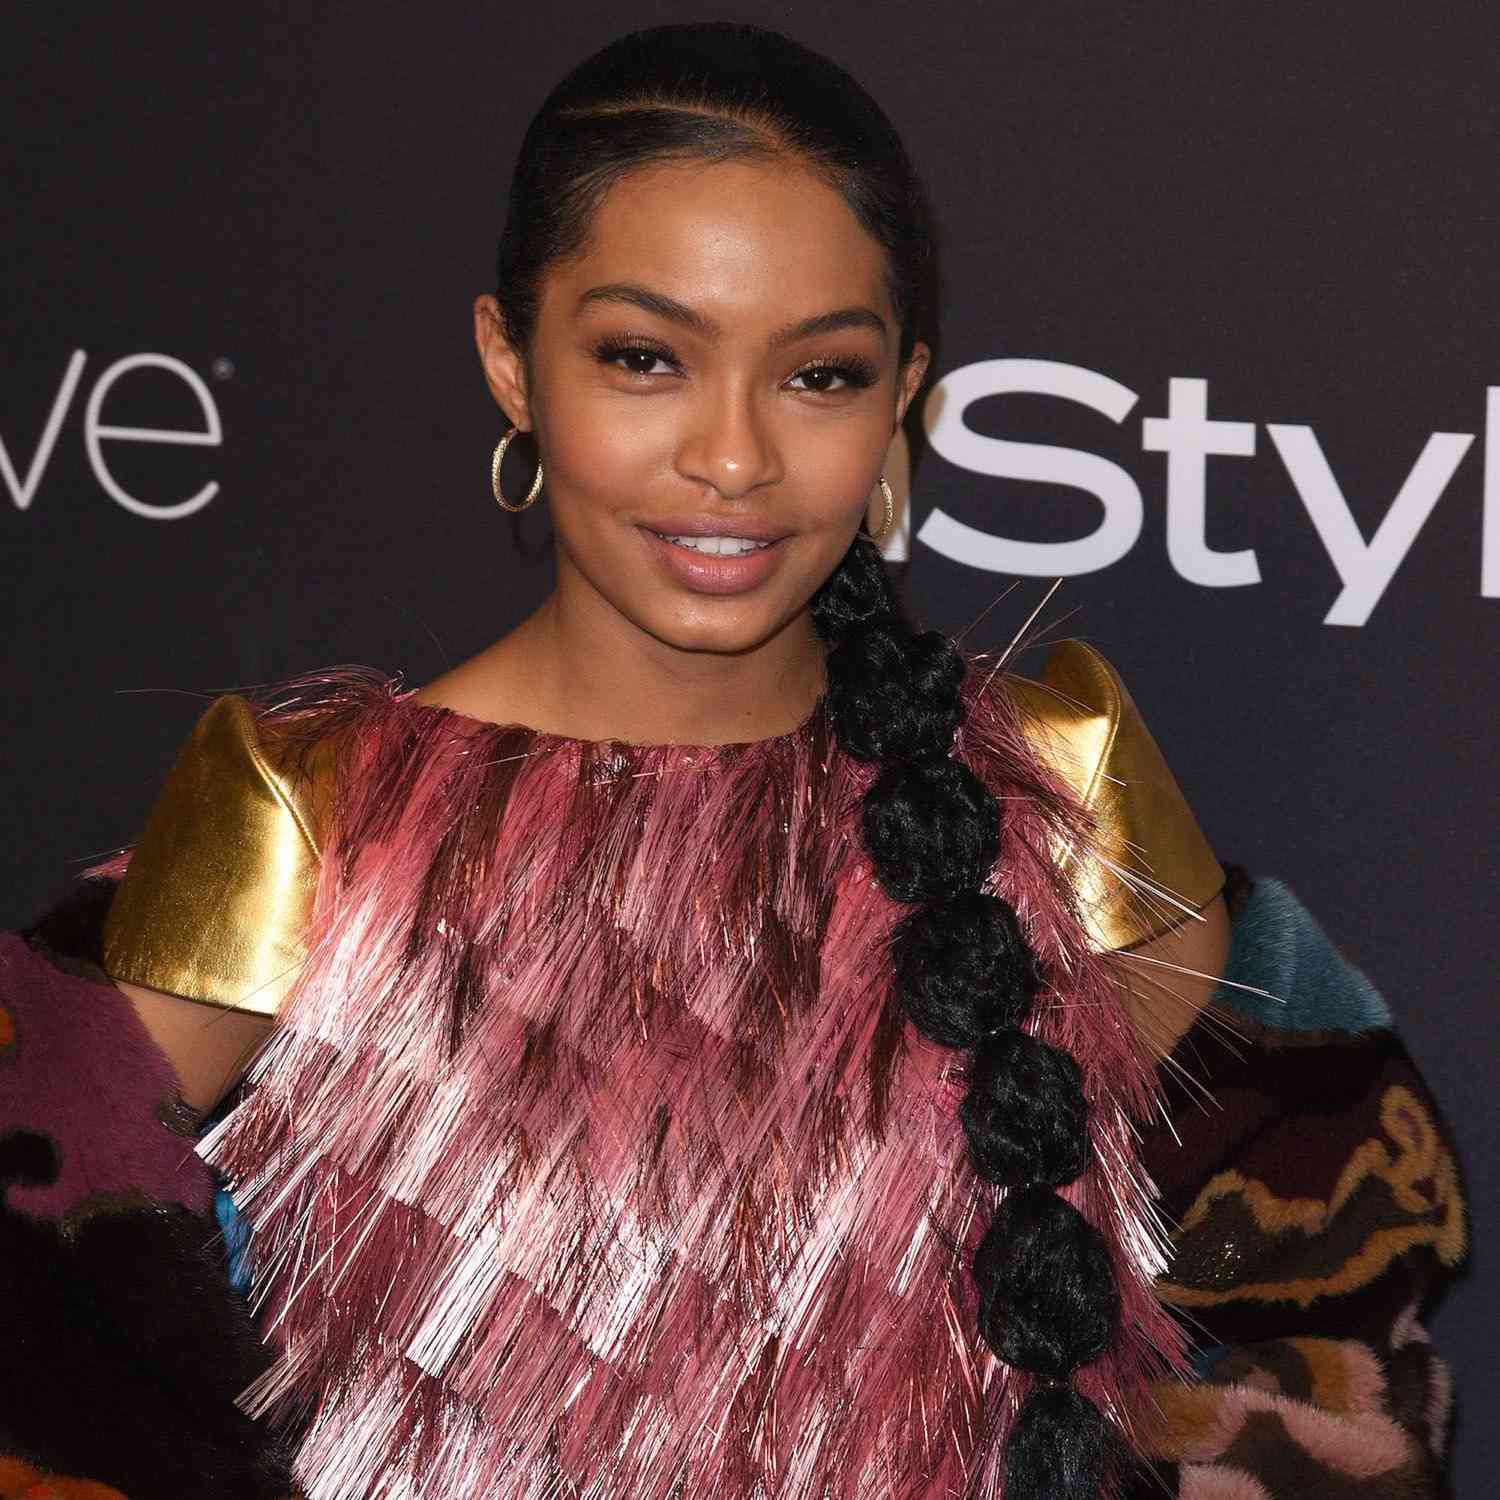 Yara Shahidi with a deep side part and a bubble ponytail